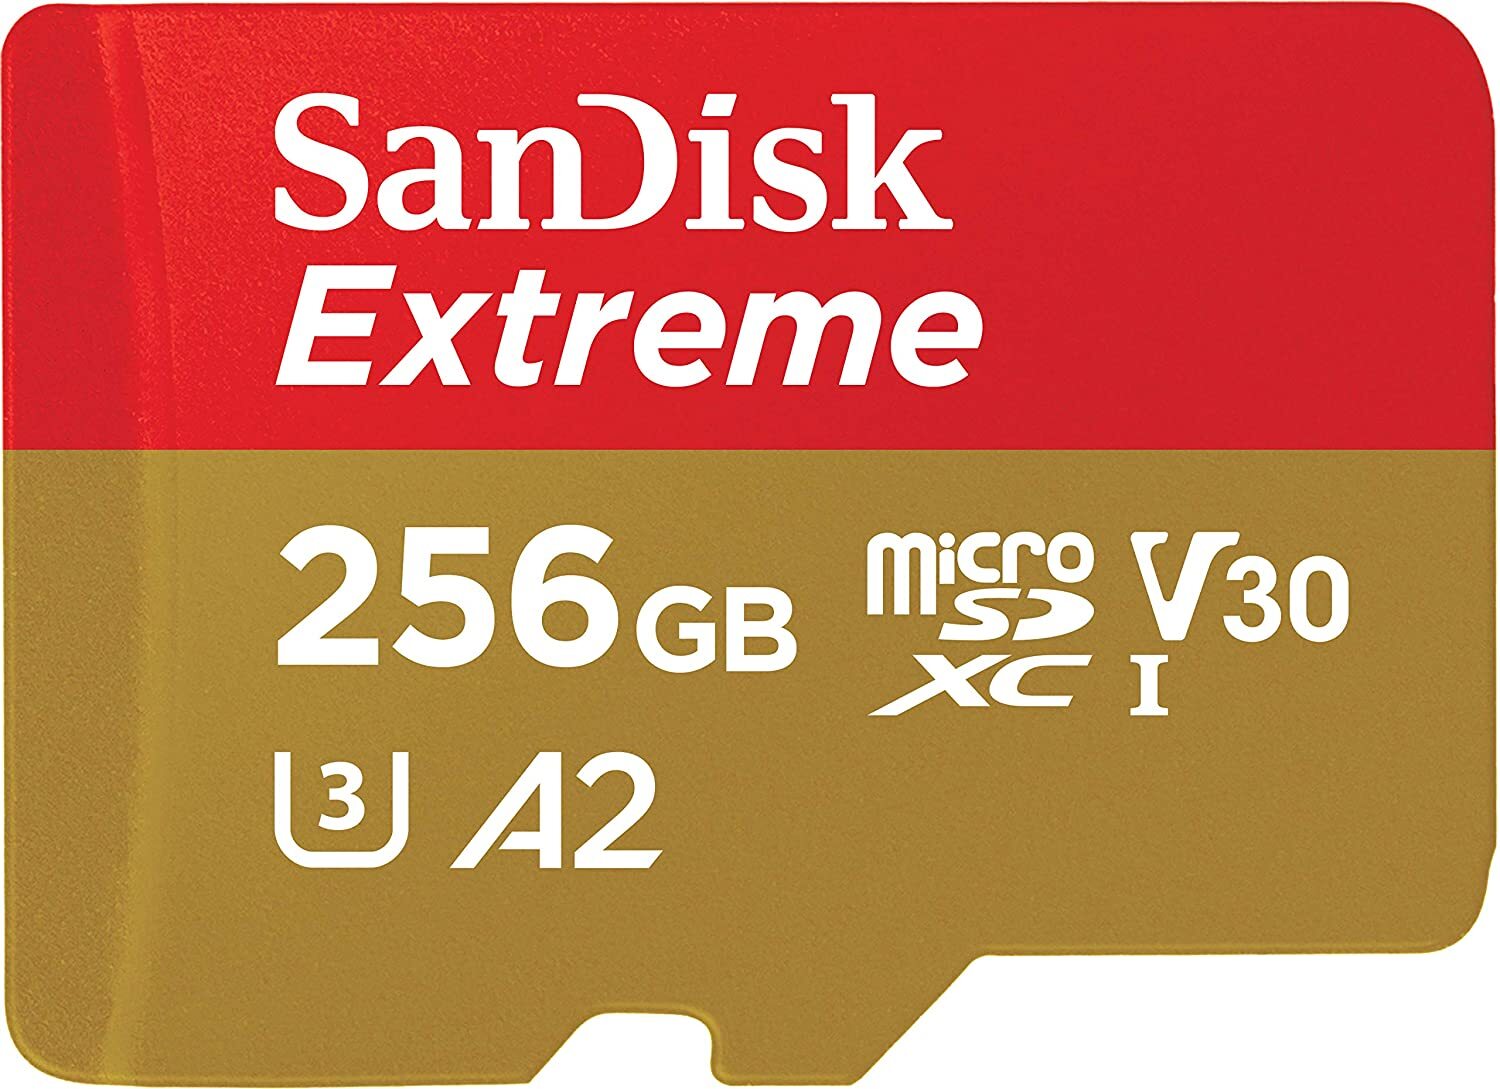 SanDisk Extreme 256GB Micro SD Card